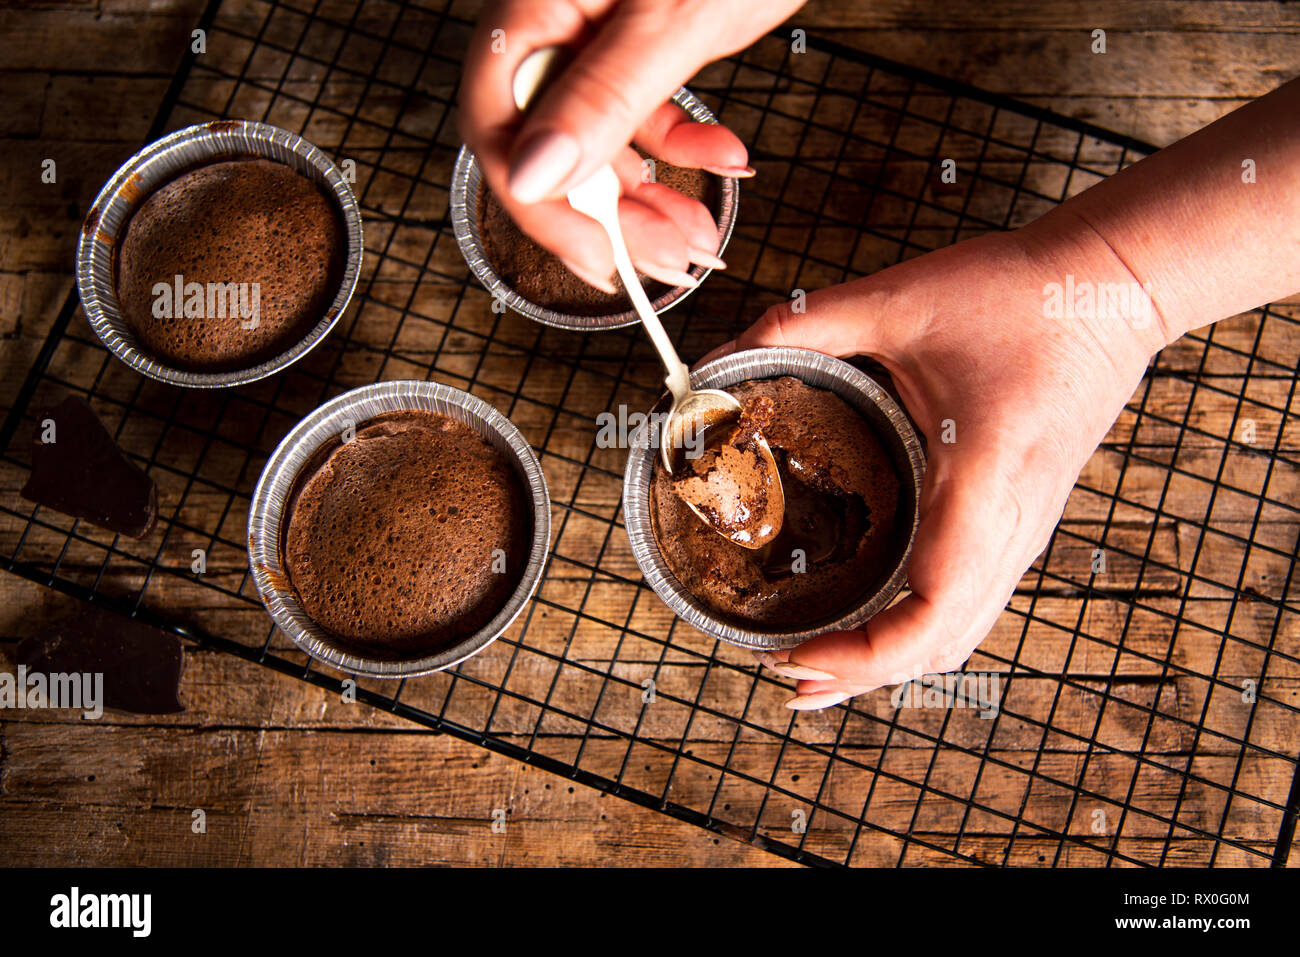 Person eating molten chocolate cake close up Stock Photo